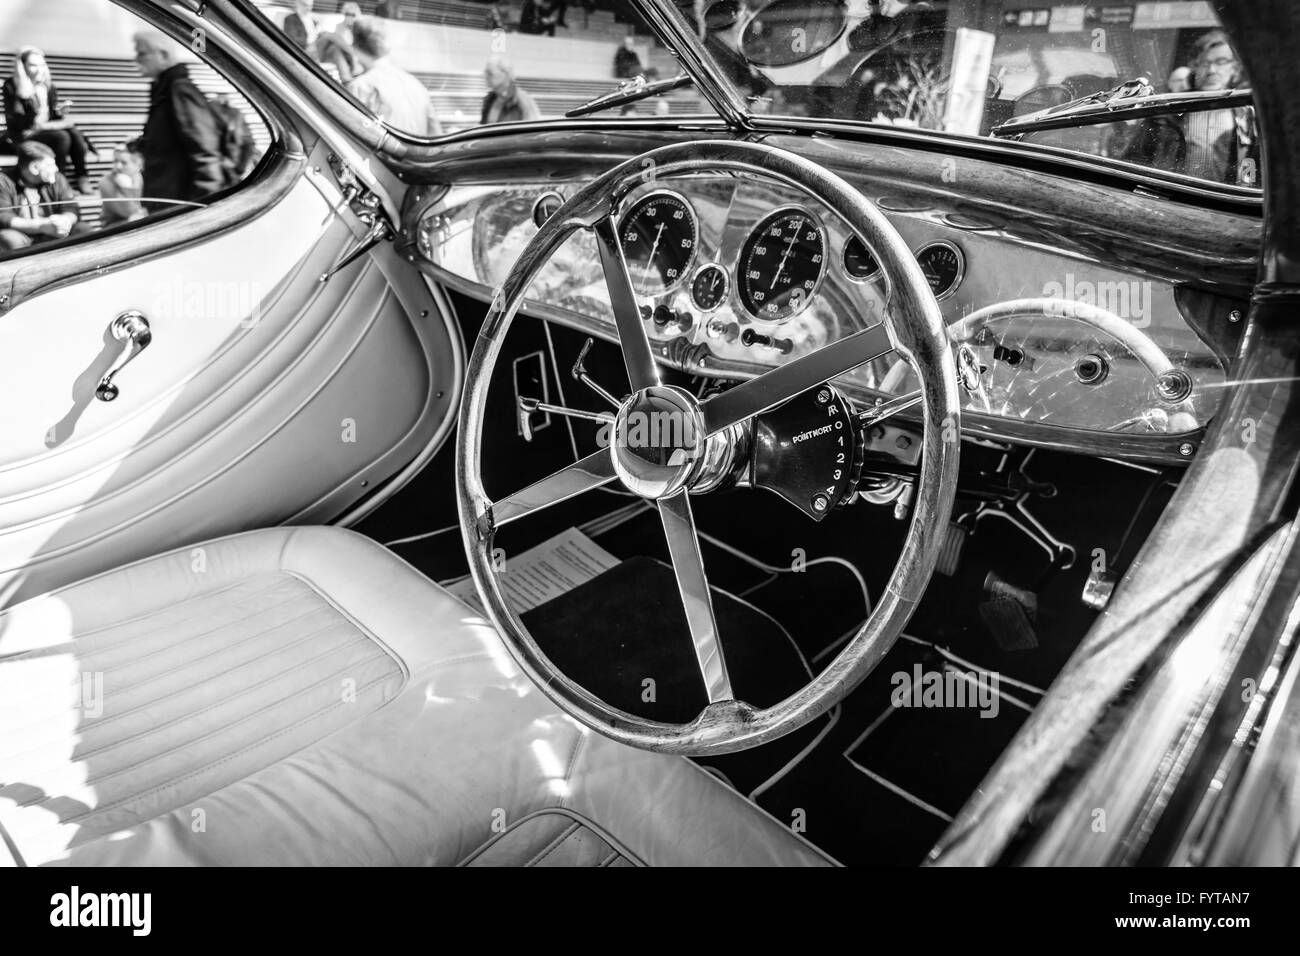 Cabin of vintage car Talbot-Lago T150 SS Teardrop Coupe, 1937. Stock Photo